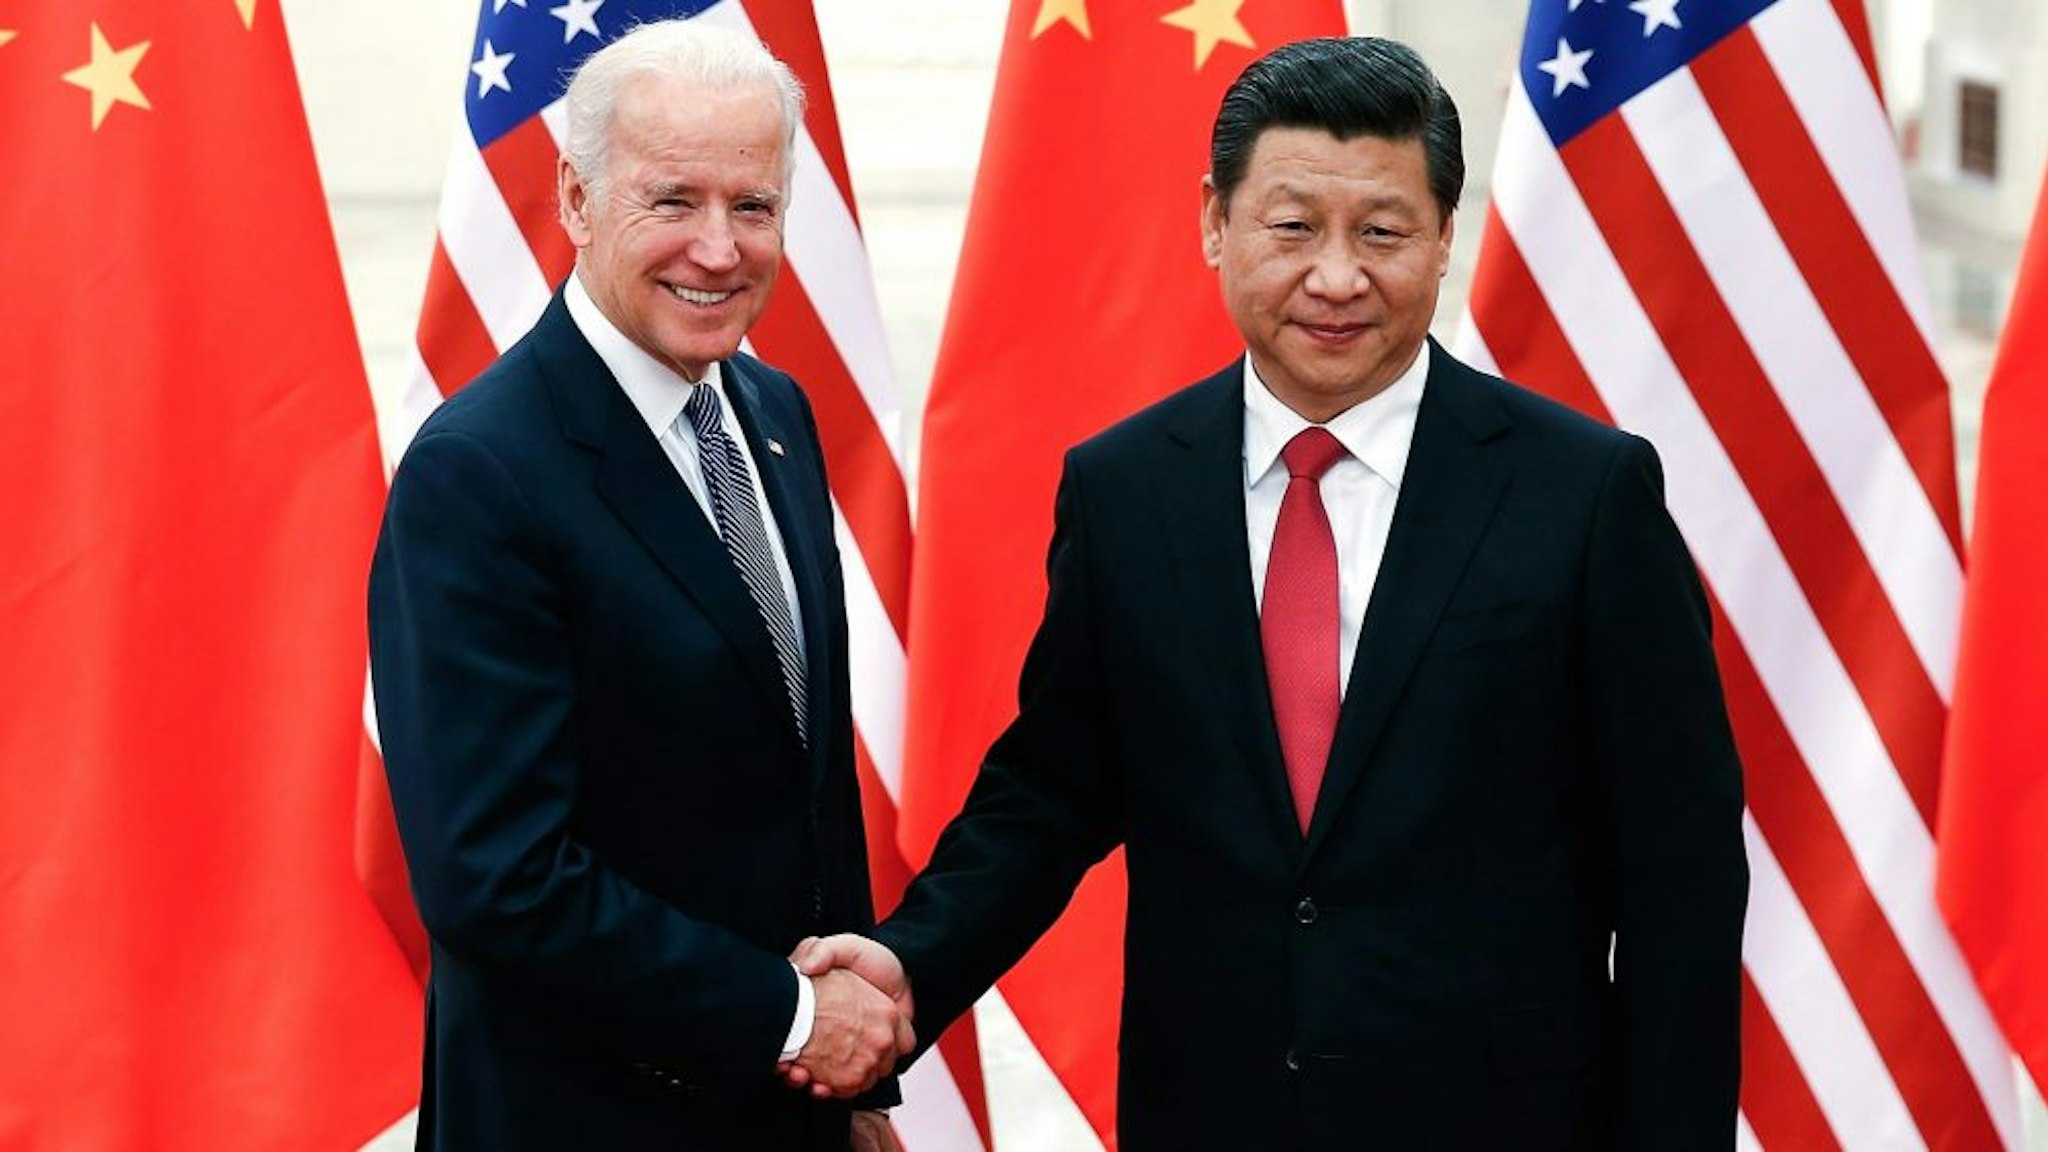 BEIJING, CHINA - DECEMBER 04: Chinese President Xi Jinping (R) shake hands with U.S Vice President Joe Biden (L) inside the Great Hall of the People on December 4, 2013 in Beijing, China. U.S Vice President Joe Biden will pay an official visit to China from December 4 to 5.